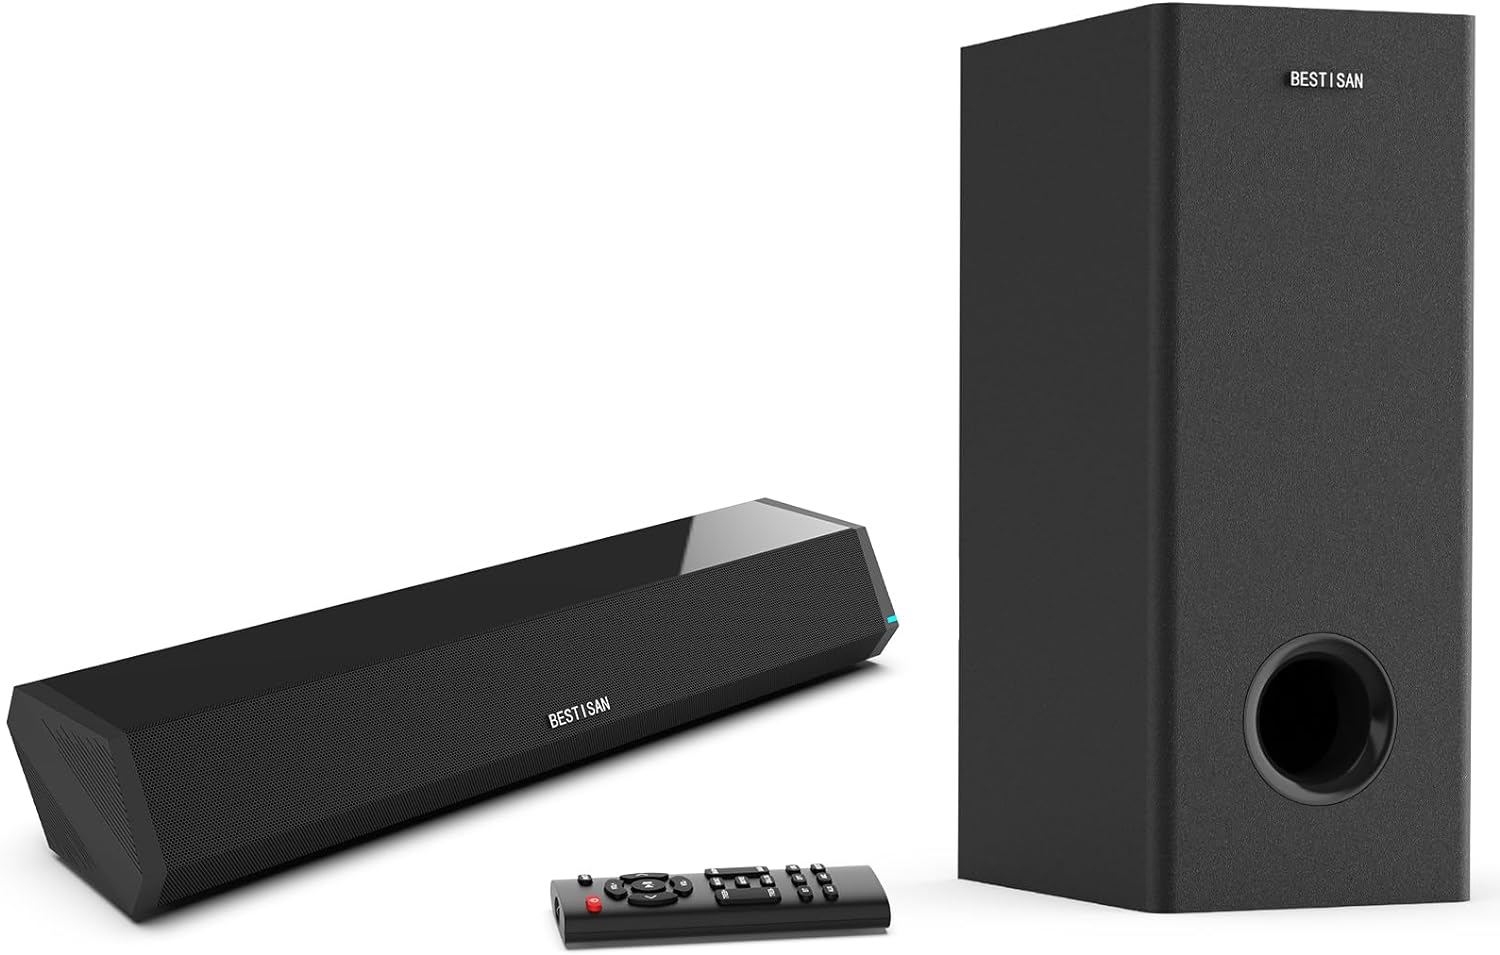 BESTISAN Sound Bar with Subwoofer Review